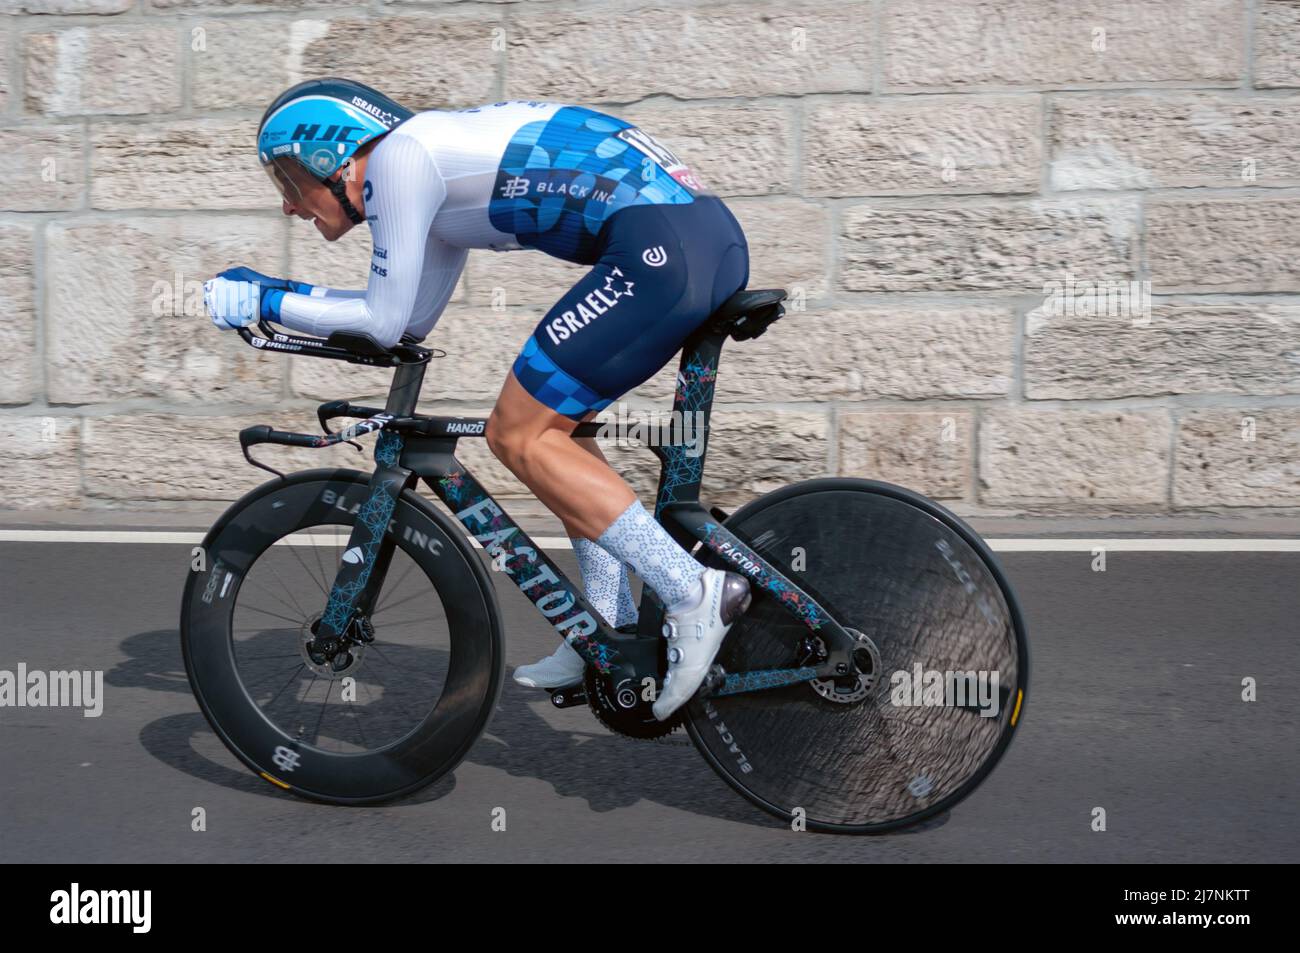 BUDAPEST, HUNGARY - MAY 07, 2022: Pro cyclist Jenthe Biermans ISRAEL - PREMIER TECH, Giro D'Italia Stage 2 Time trial - cycling competition on May 07, Stock Photo